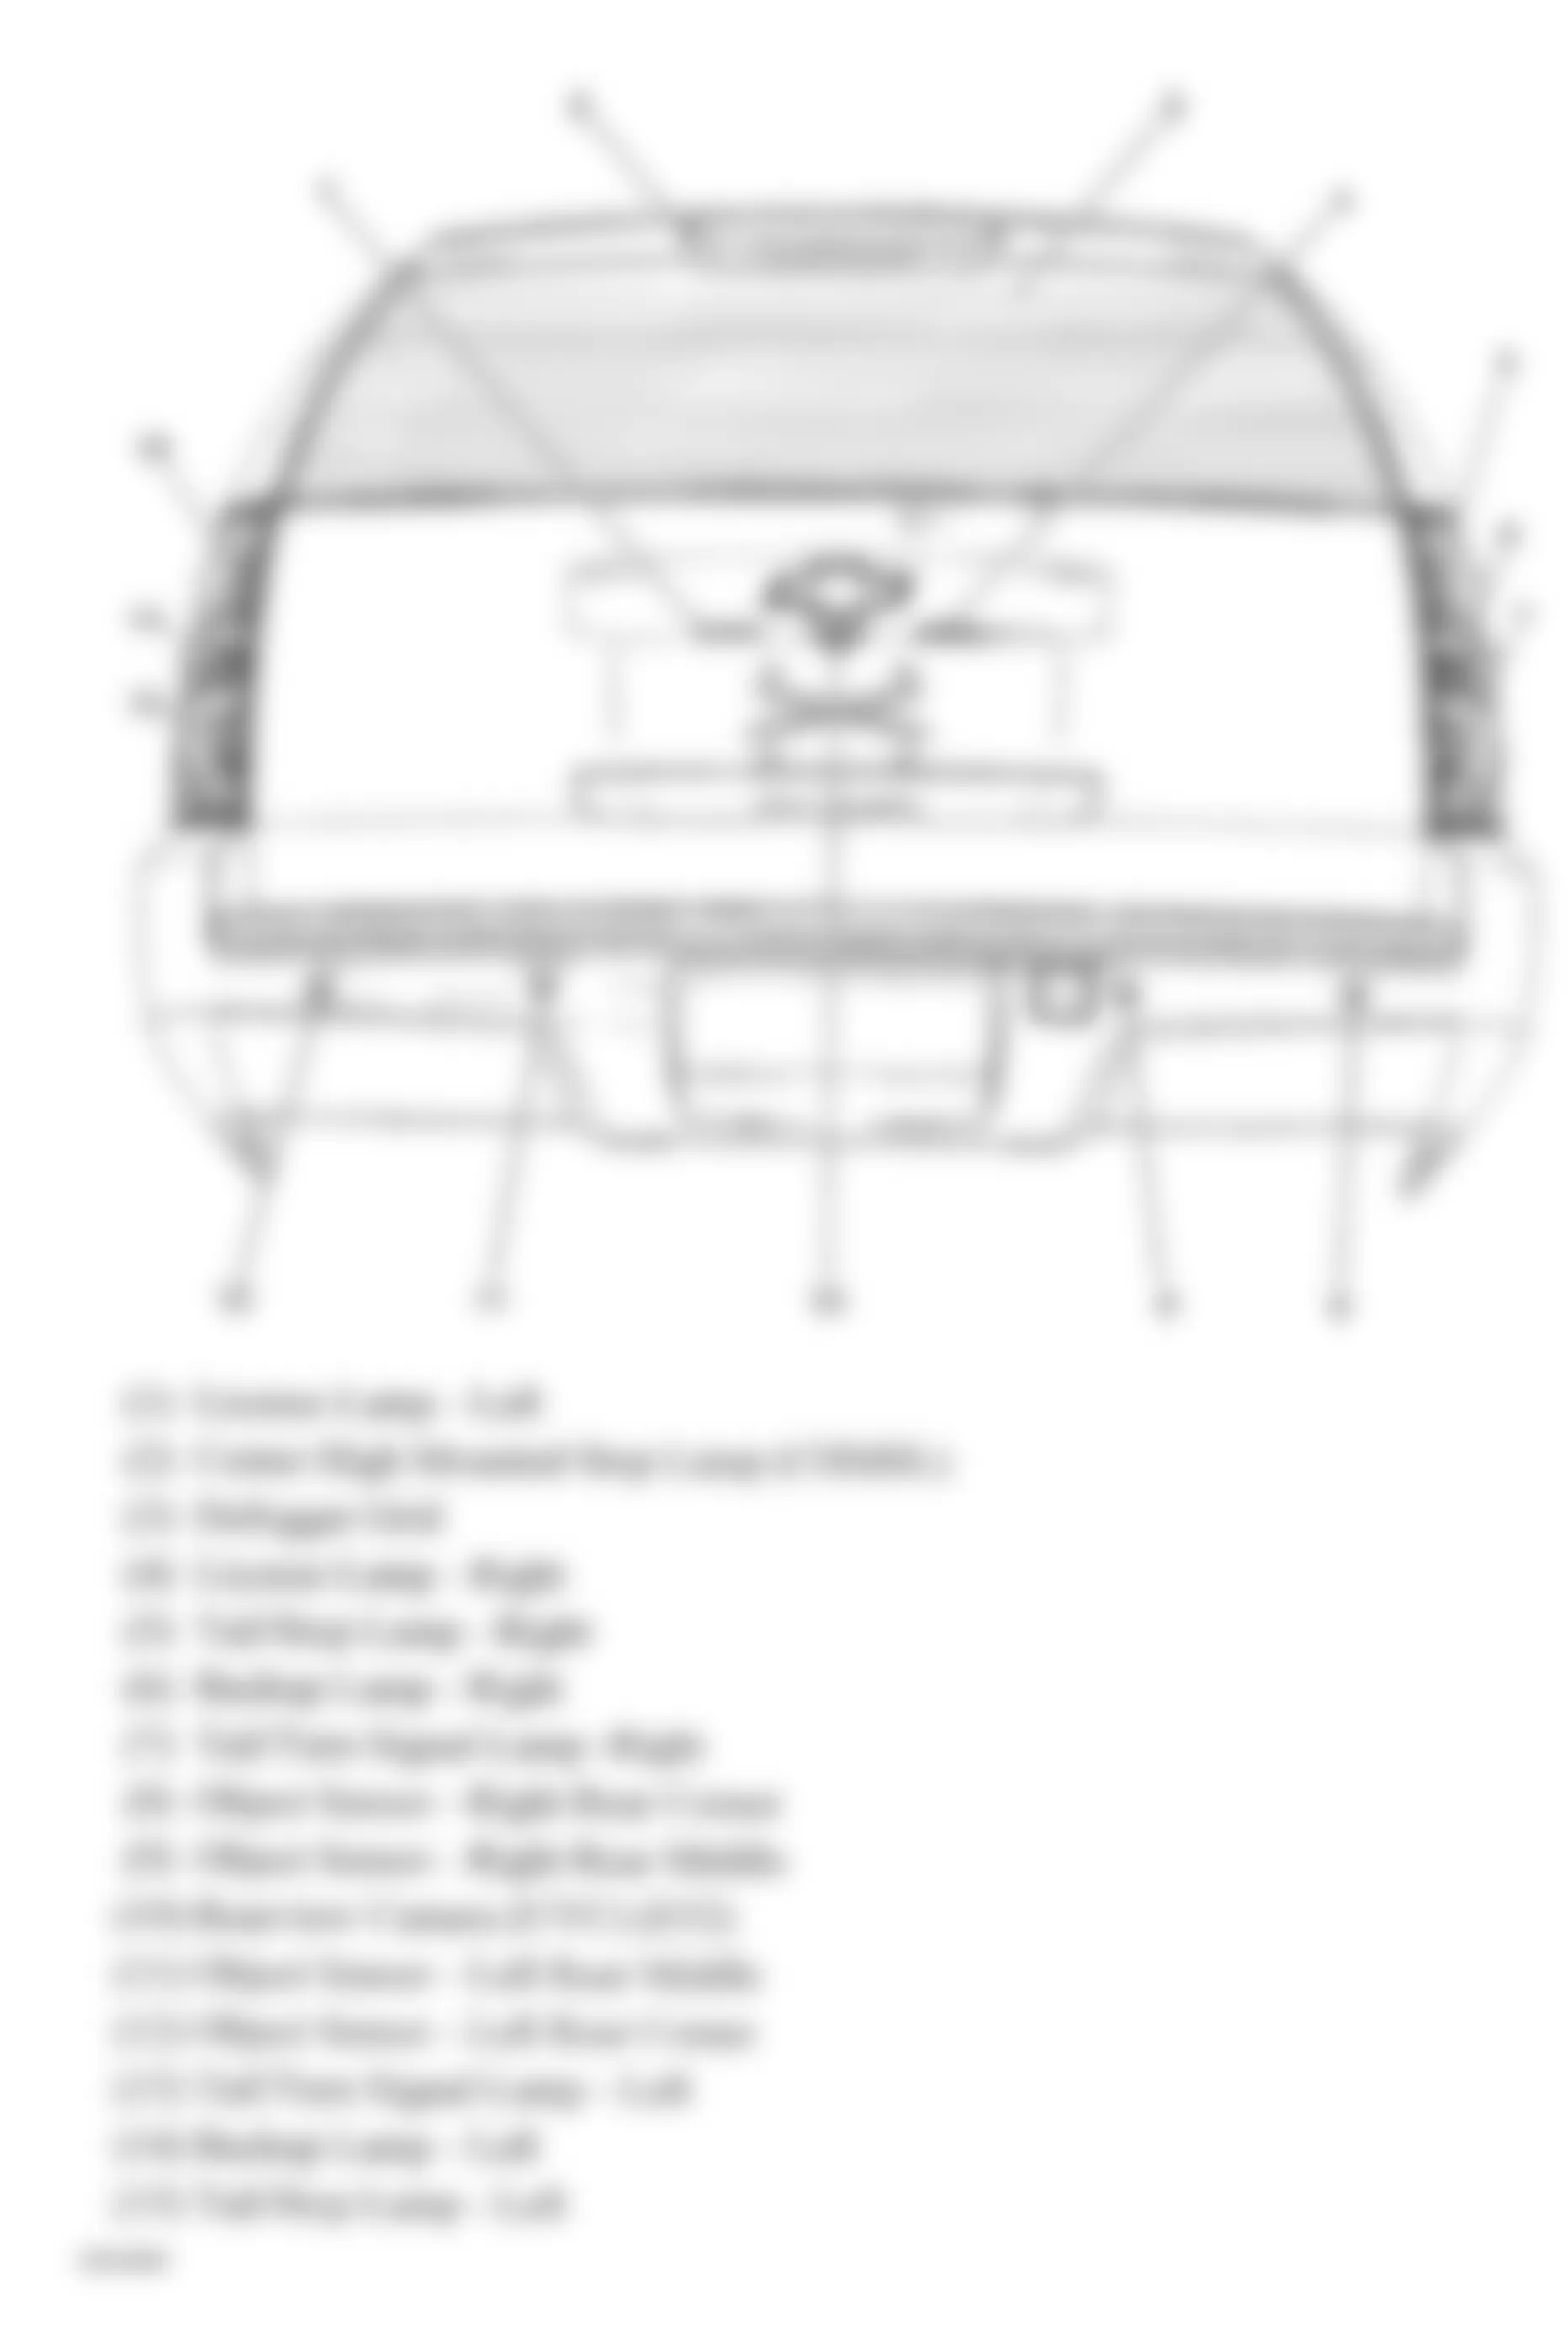 Chevrolet Avalanche 2008 - Component Locations -  Rear Of Vehicle (Avalanche, Suburban & Tahoe W/One Piece Liftgate)